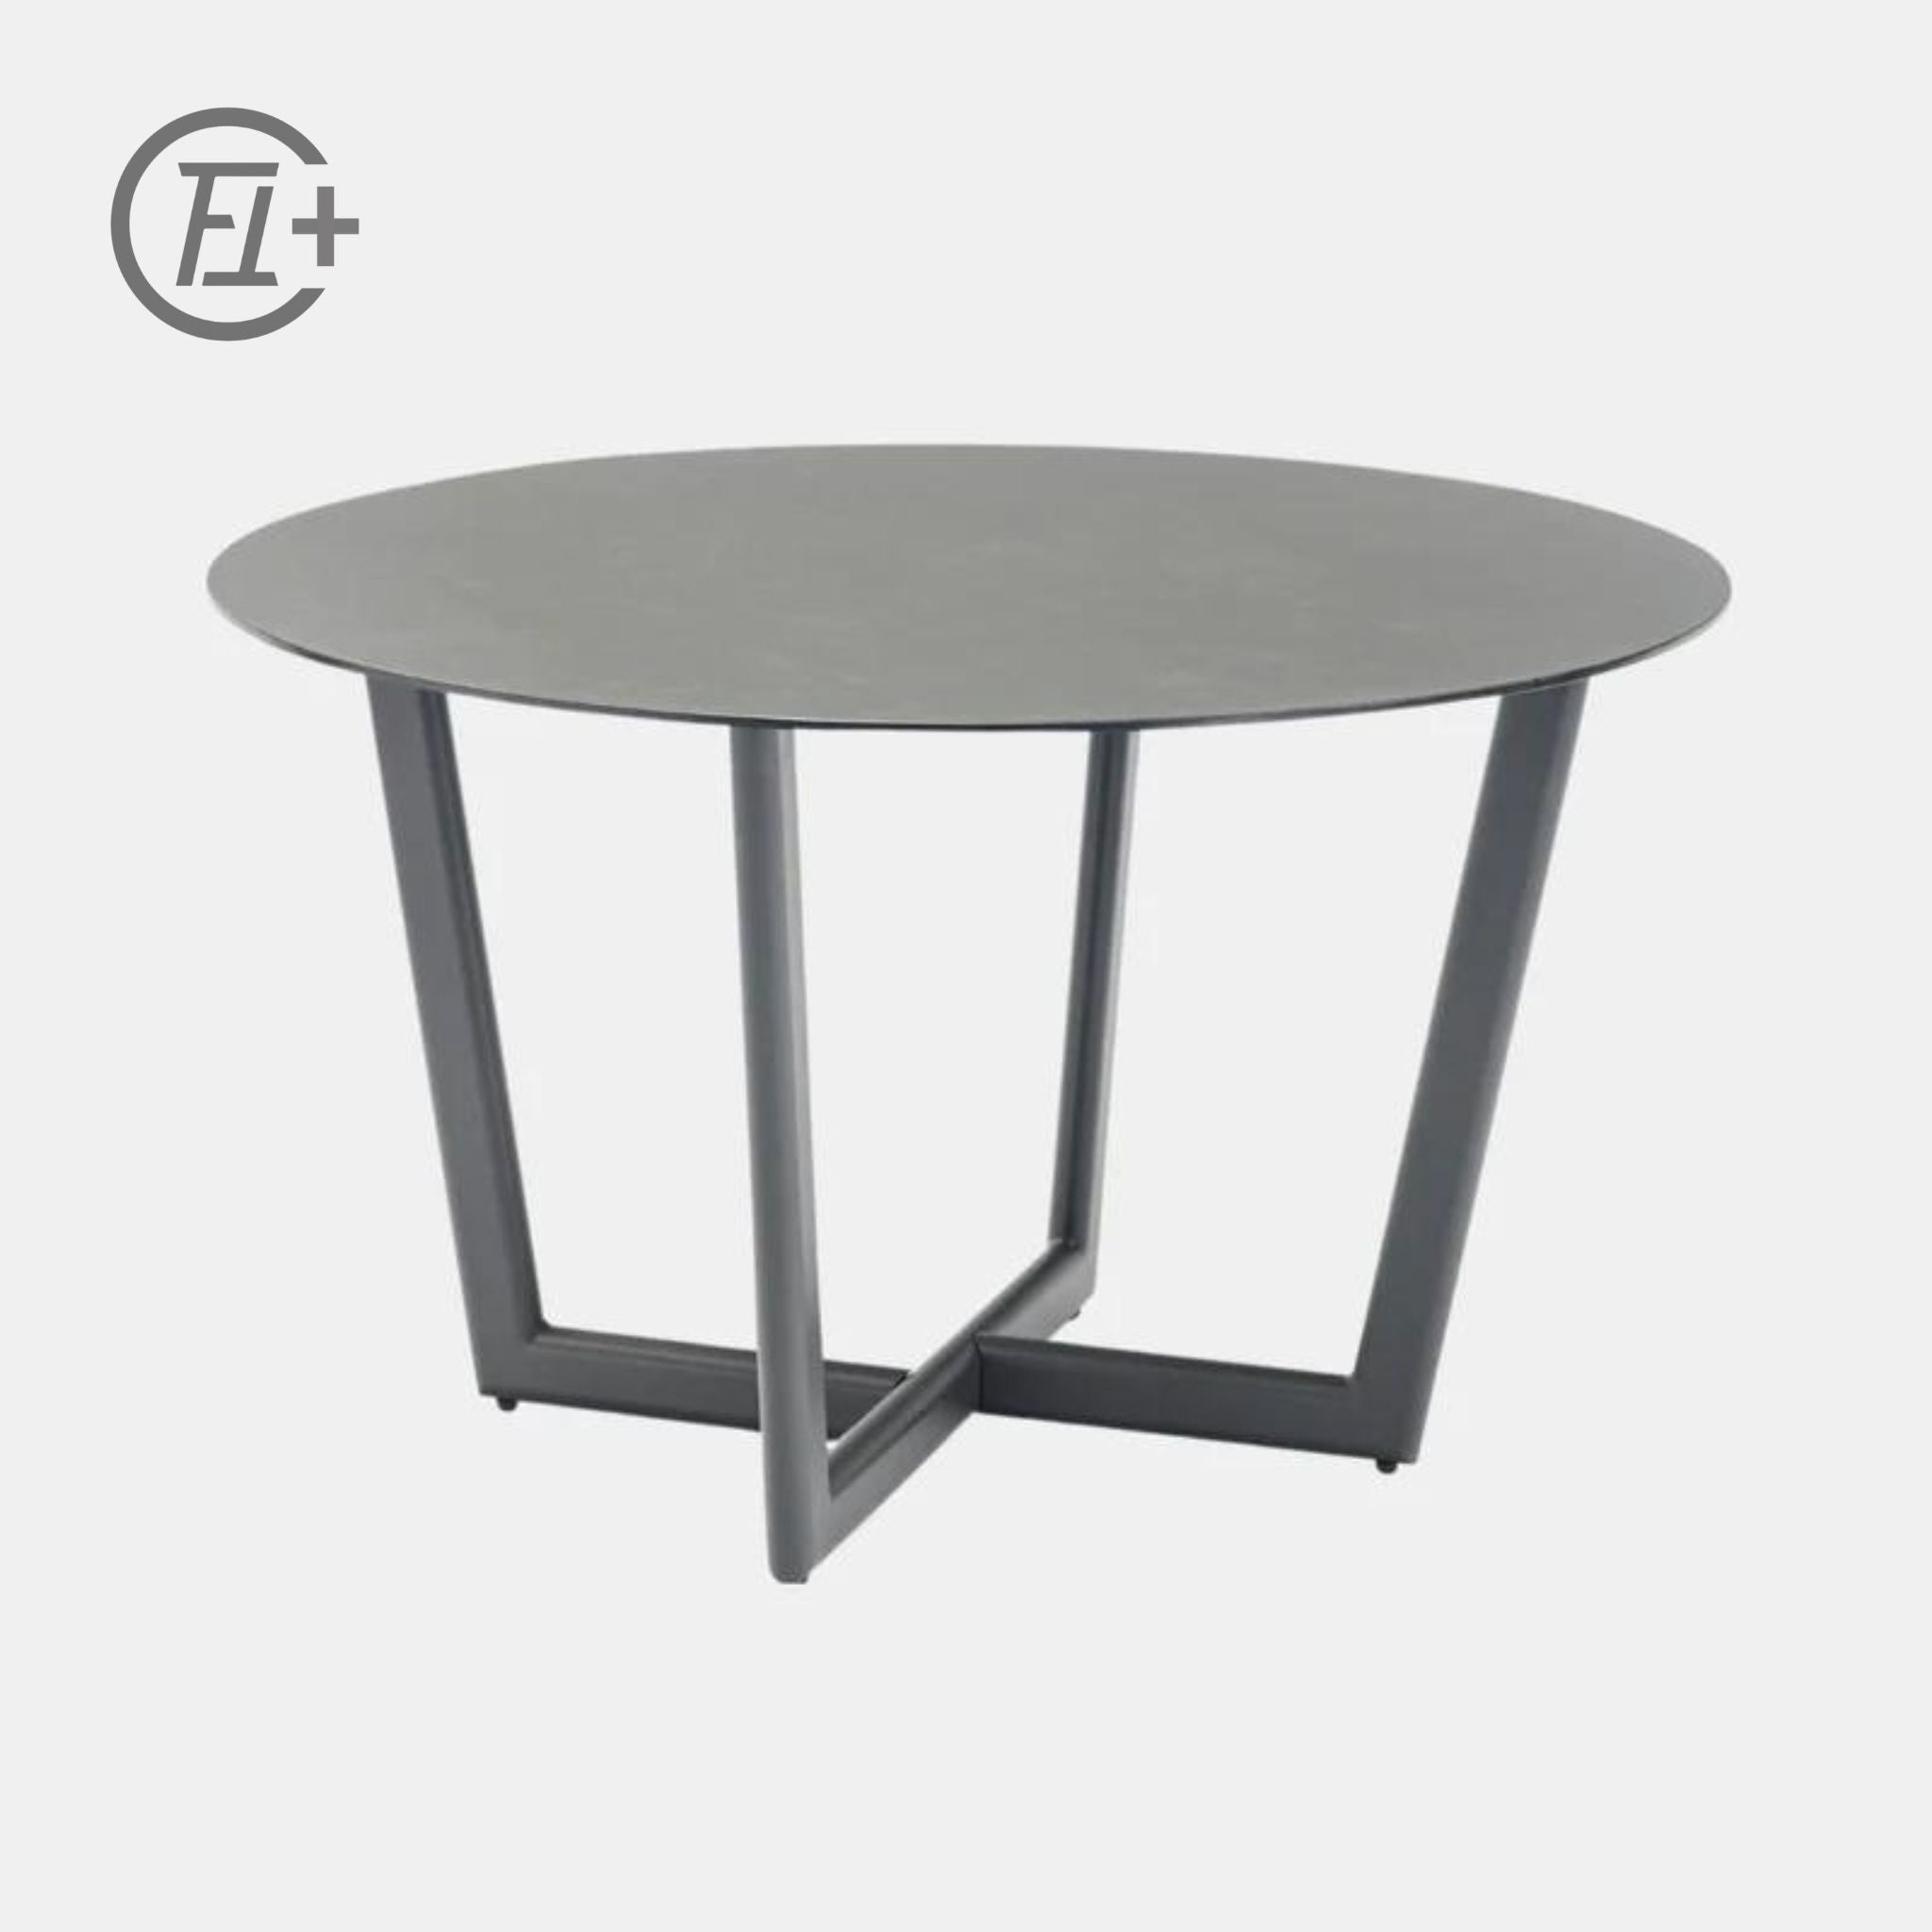 Hug Series | Outdoor Round Dining Table - The Feelter